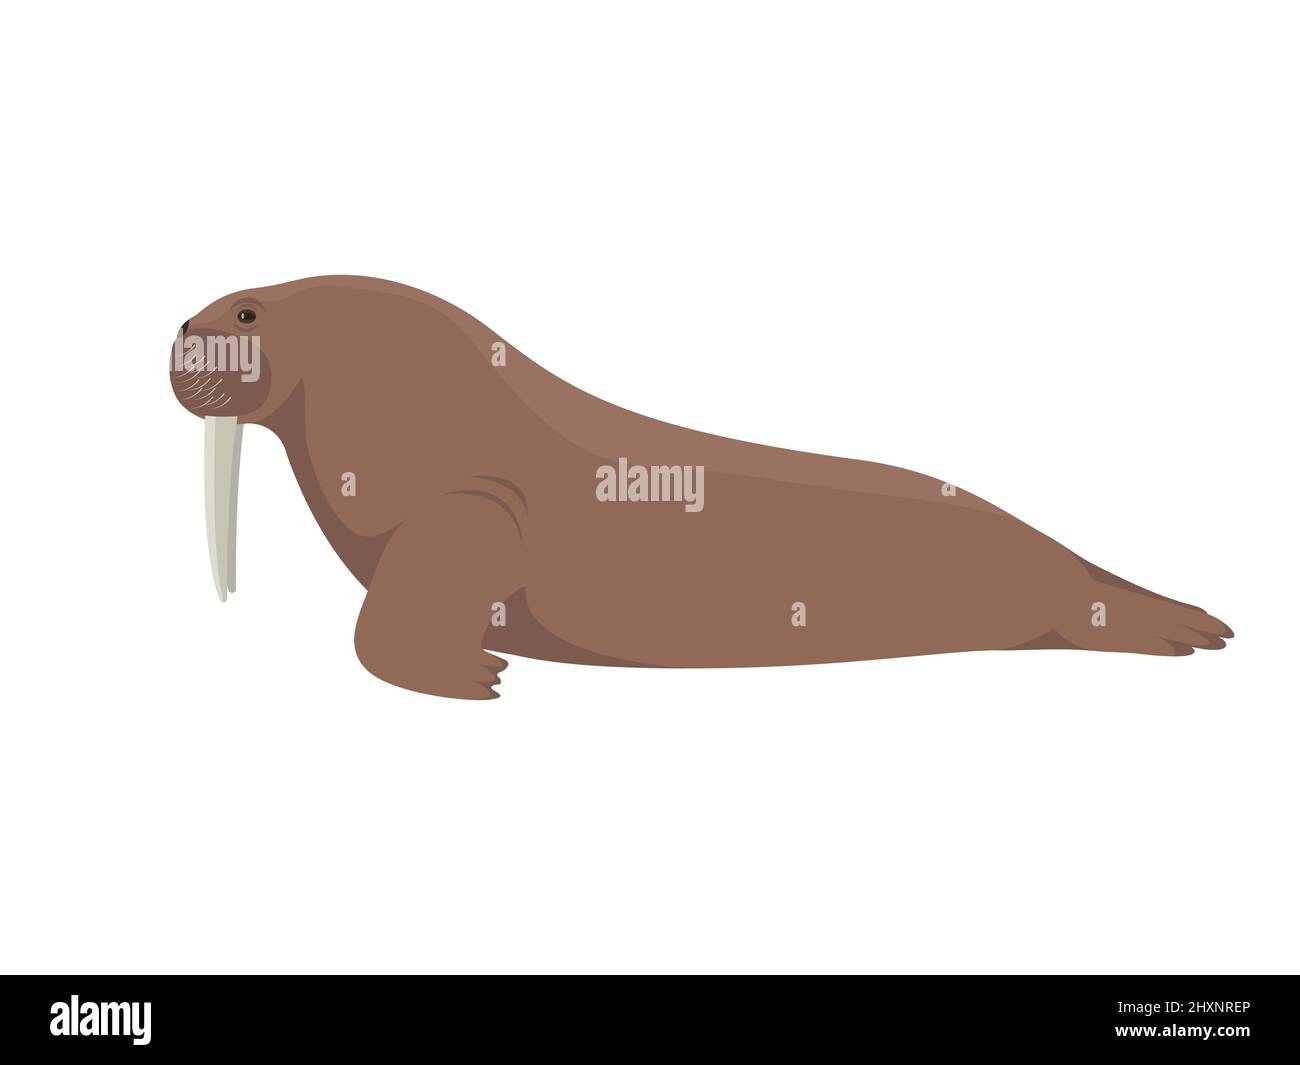 Walrus pinniped. Vector illustration of a large sea animal walrus with tusks isolated on white background. Side view, profile. Stock Vector